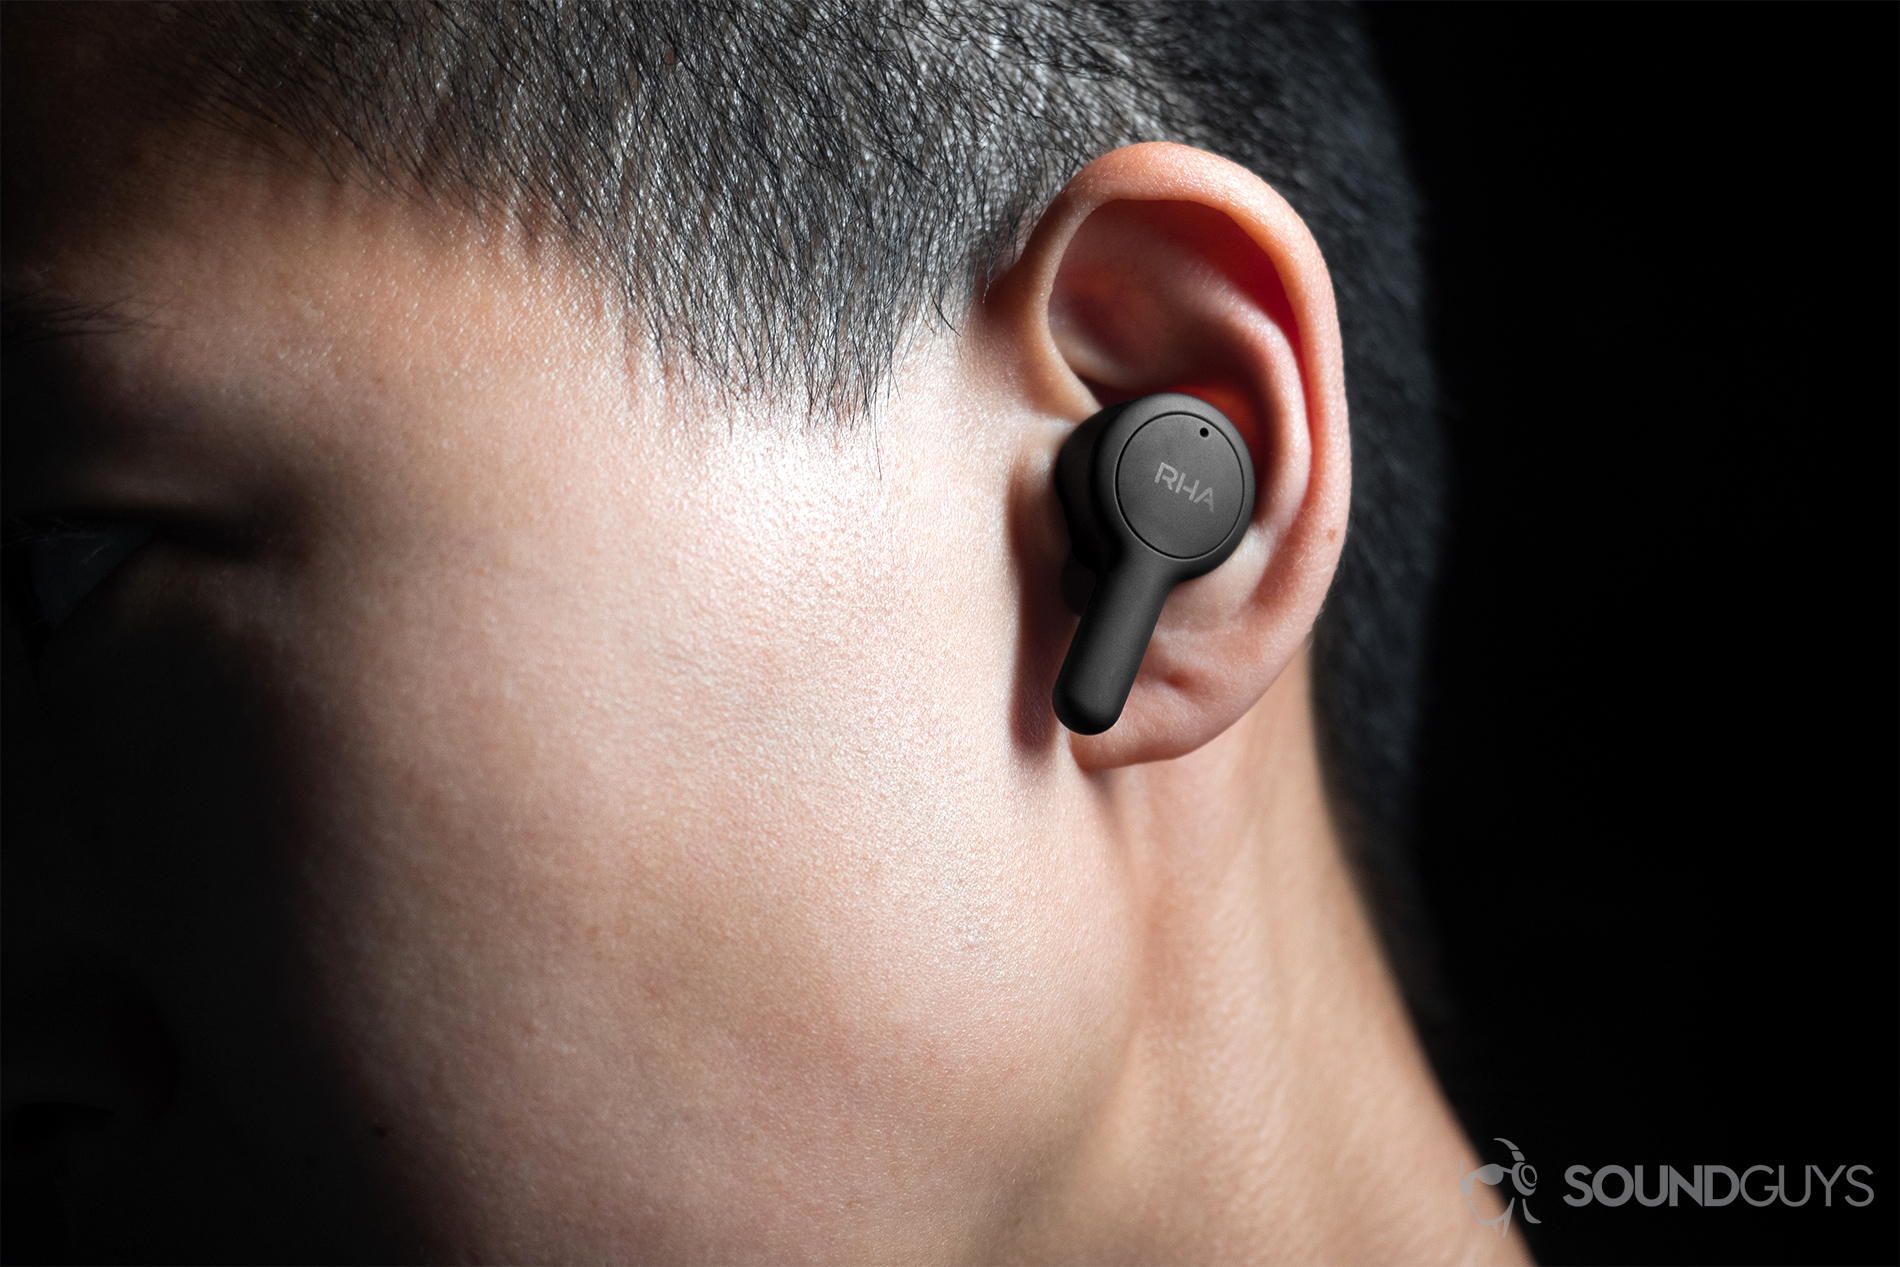 The left RHA TrueConnect earbud being worn by a woman, it protrudes a bit from the ear with the stem angled downward.